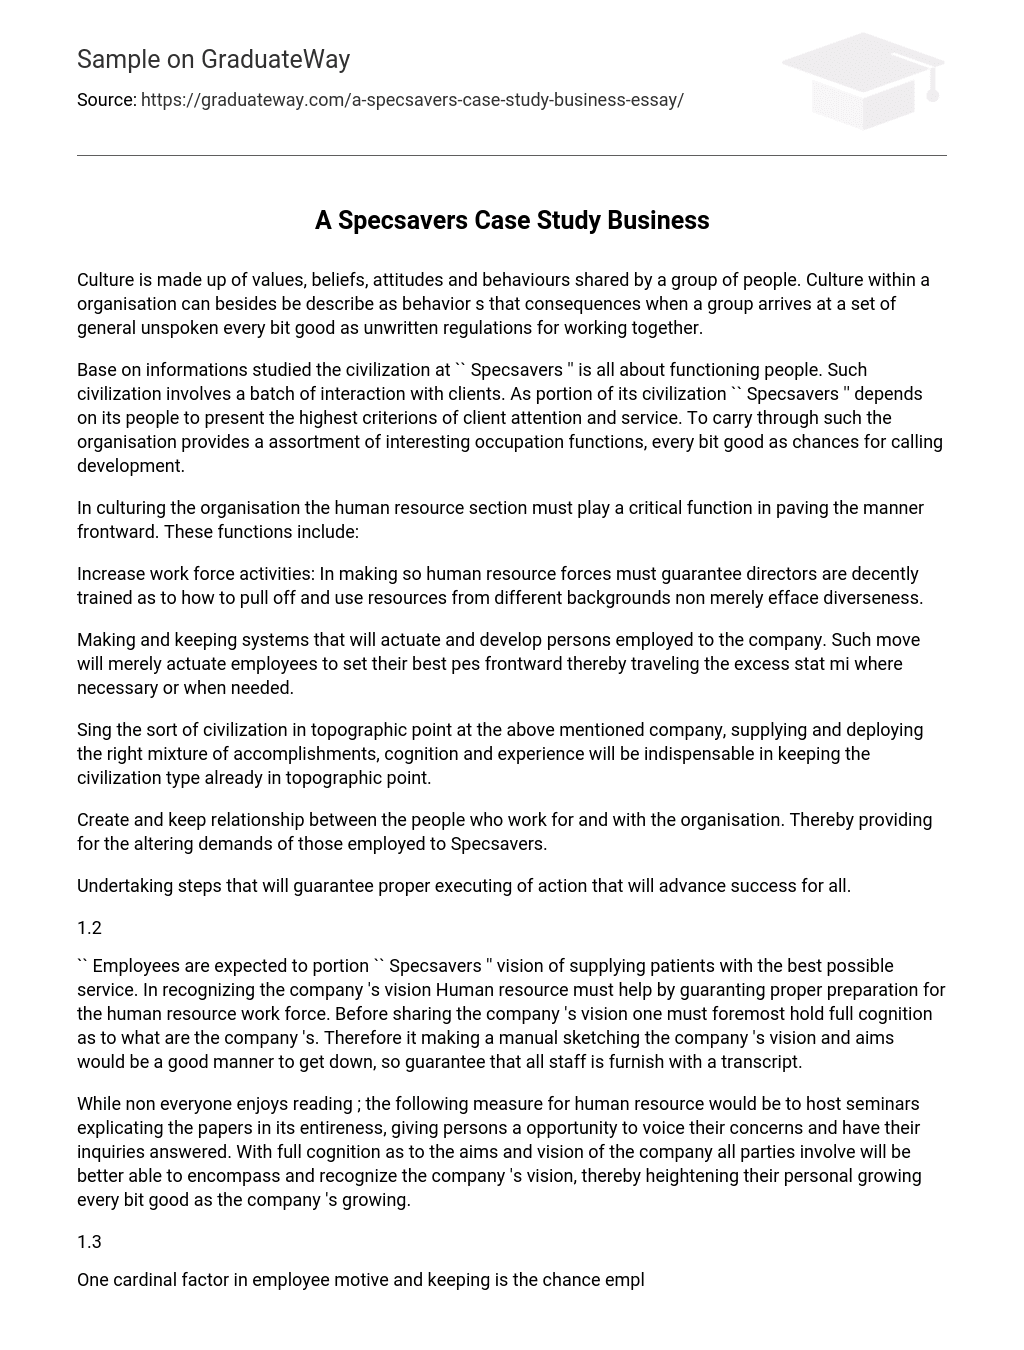 A Specsavers Case Study Business